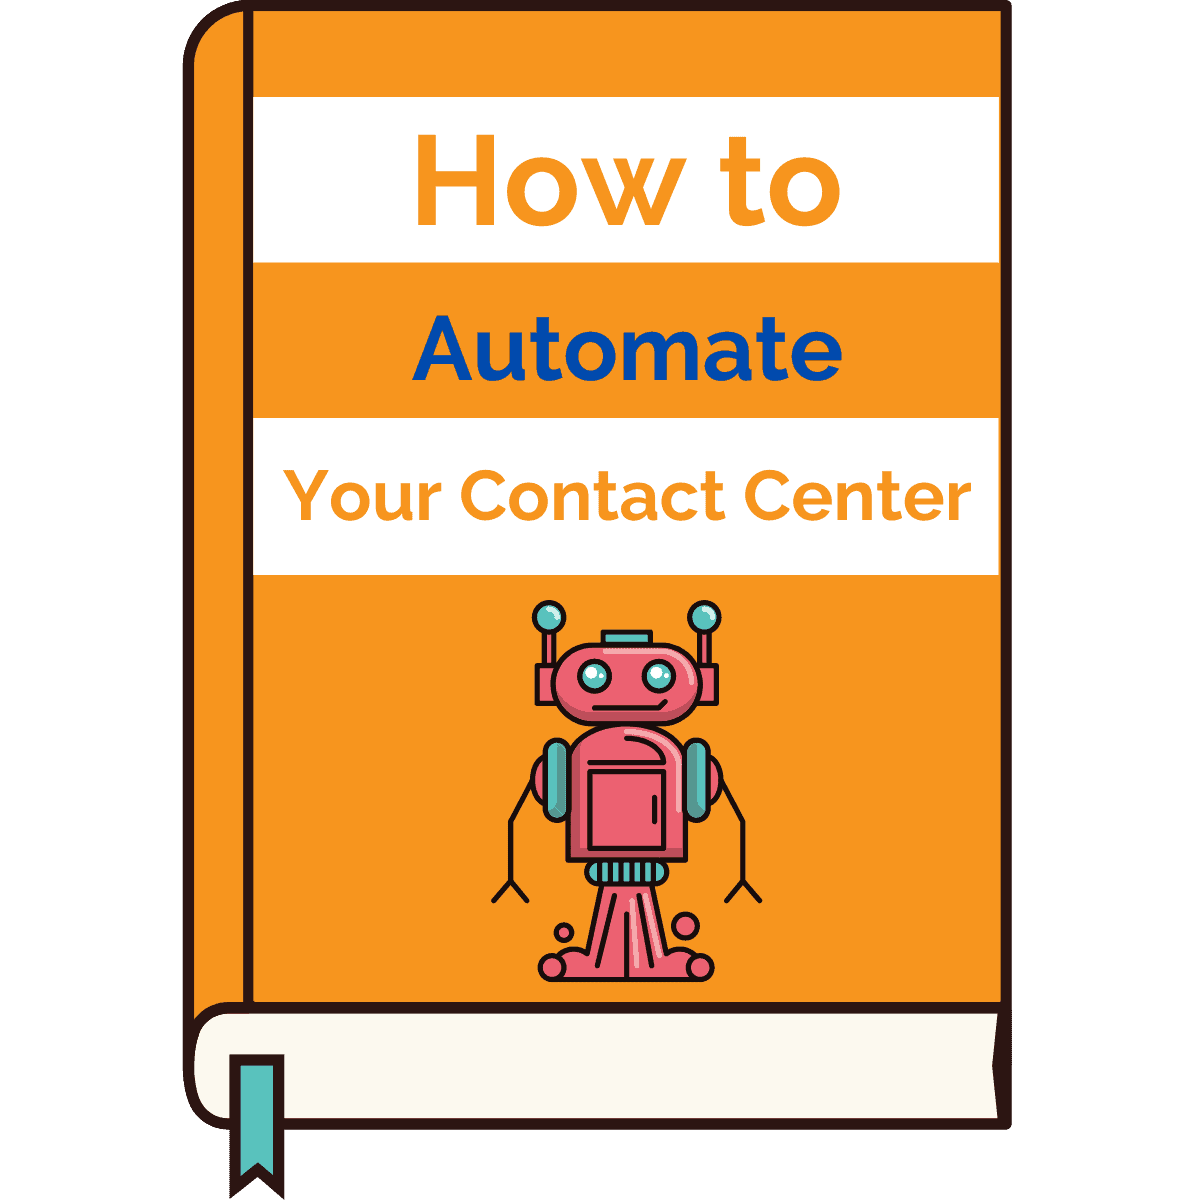 Contact Center automation